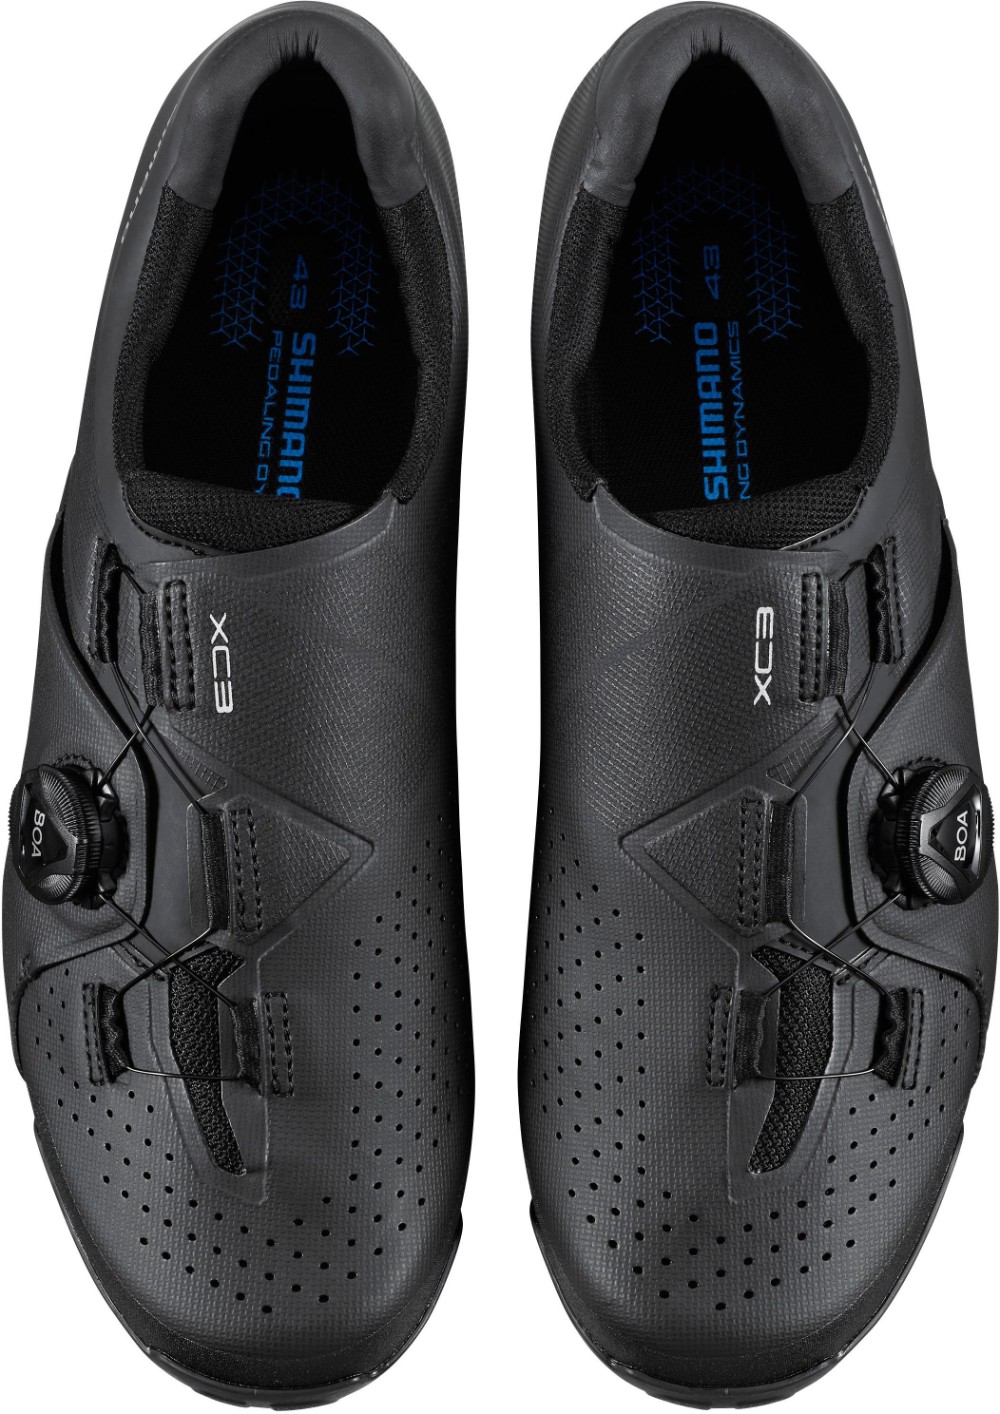 XC3 (XC300) SPD  MTB Cross Country Shoes image 1